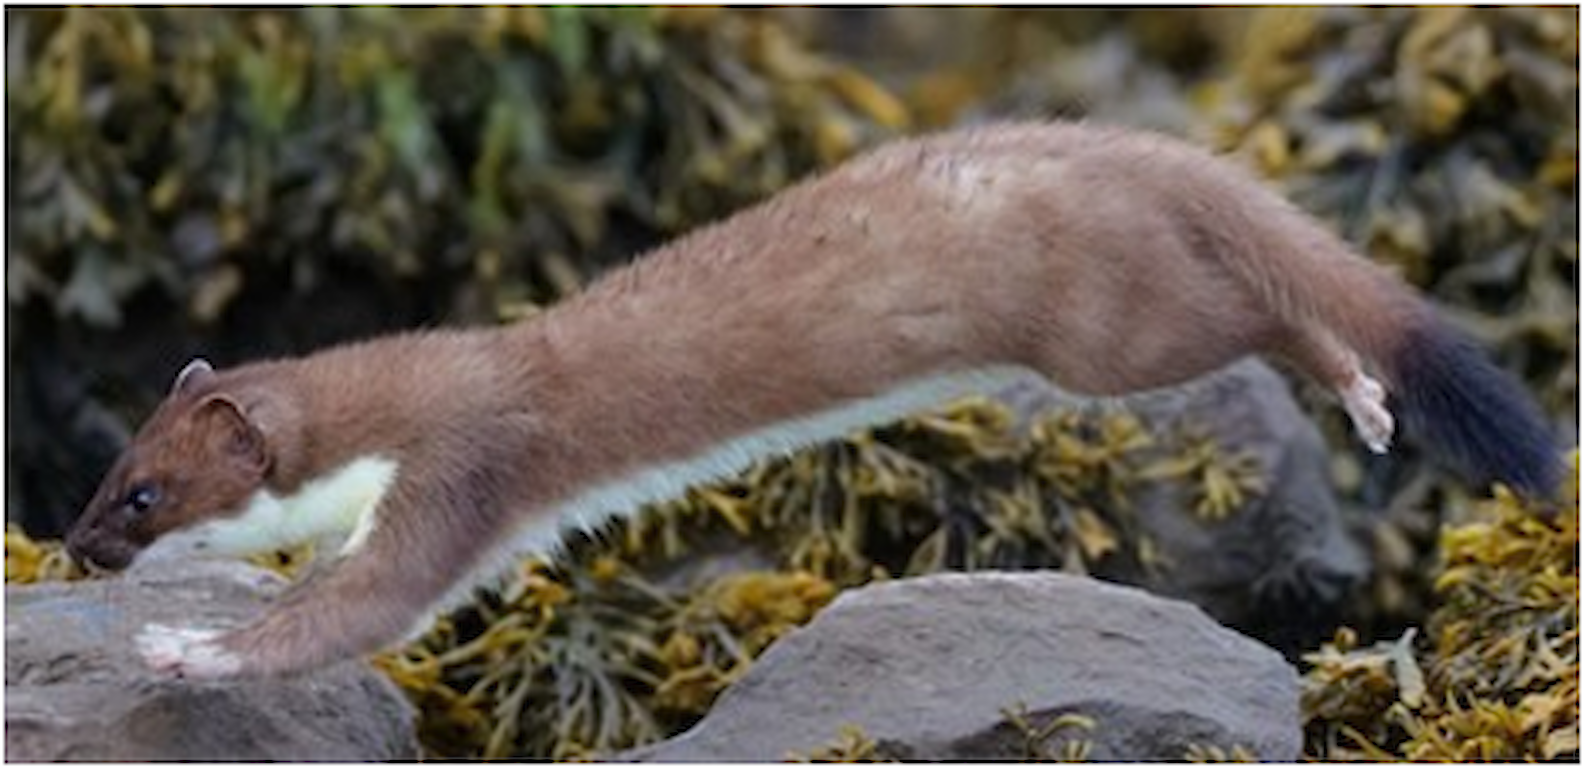 Stoat on rocks with seaweed